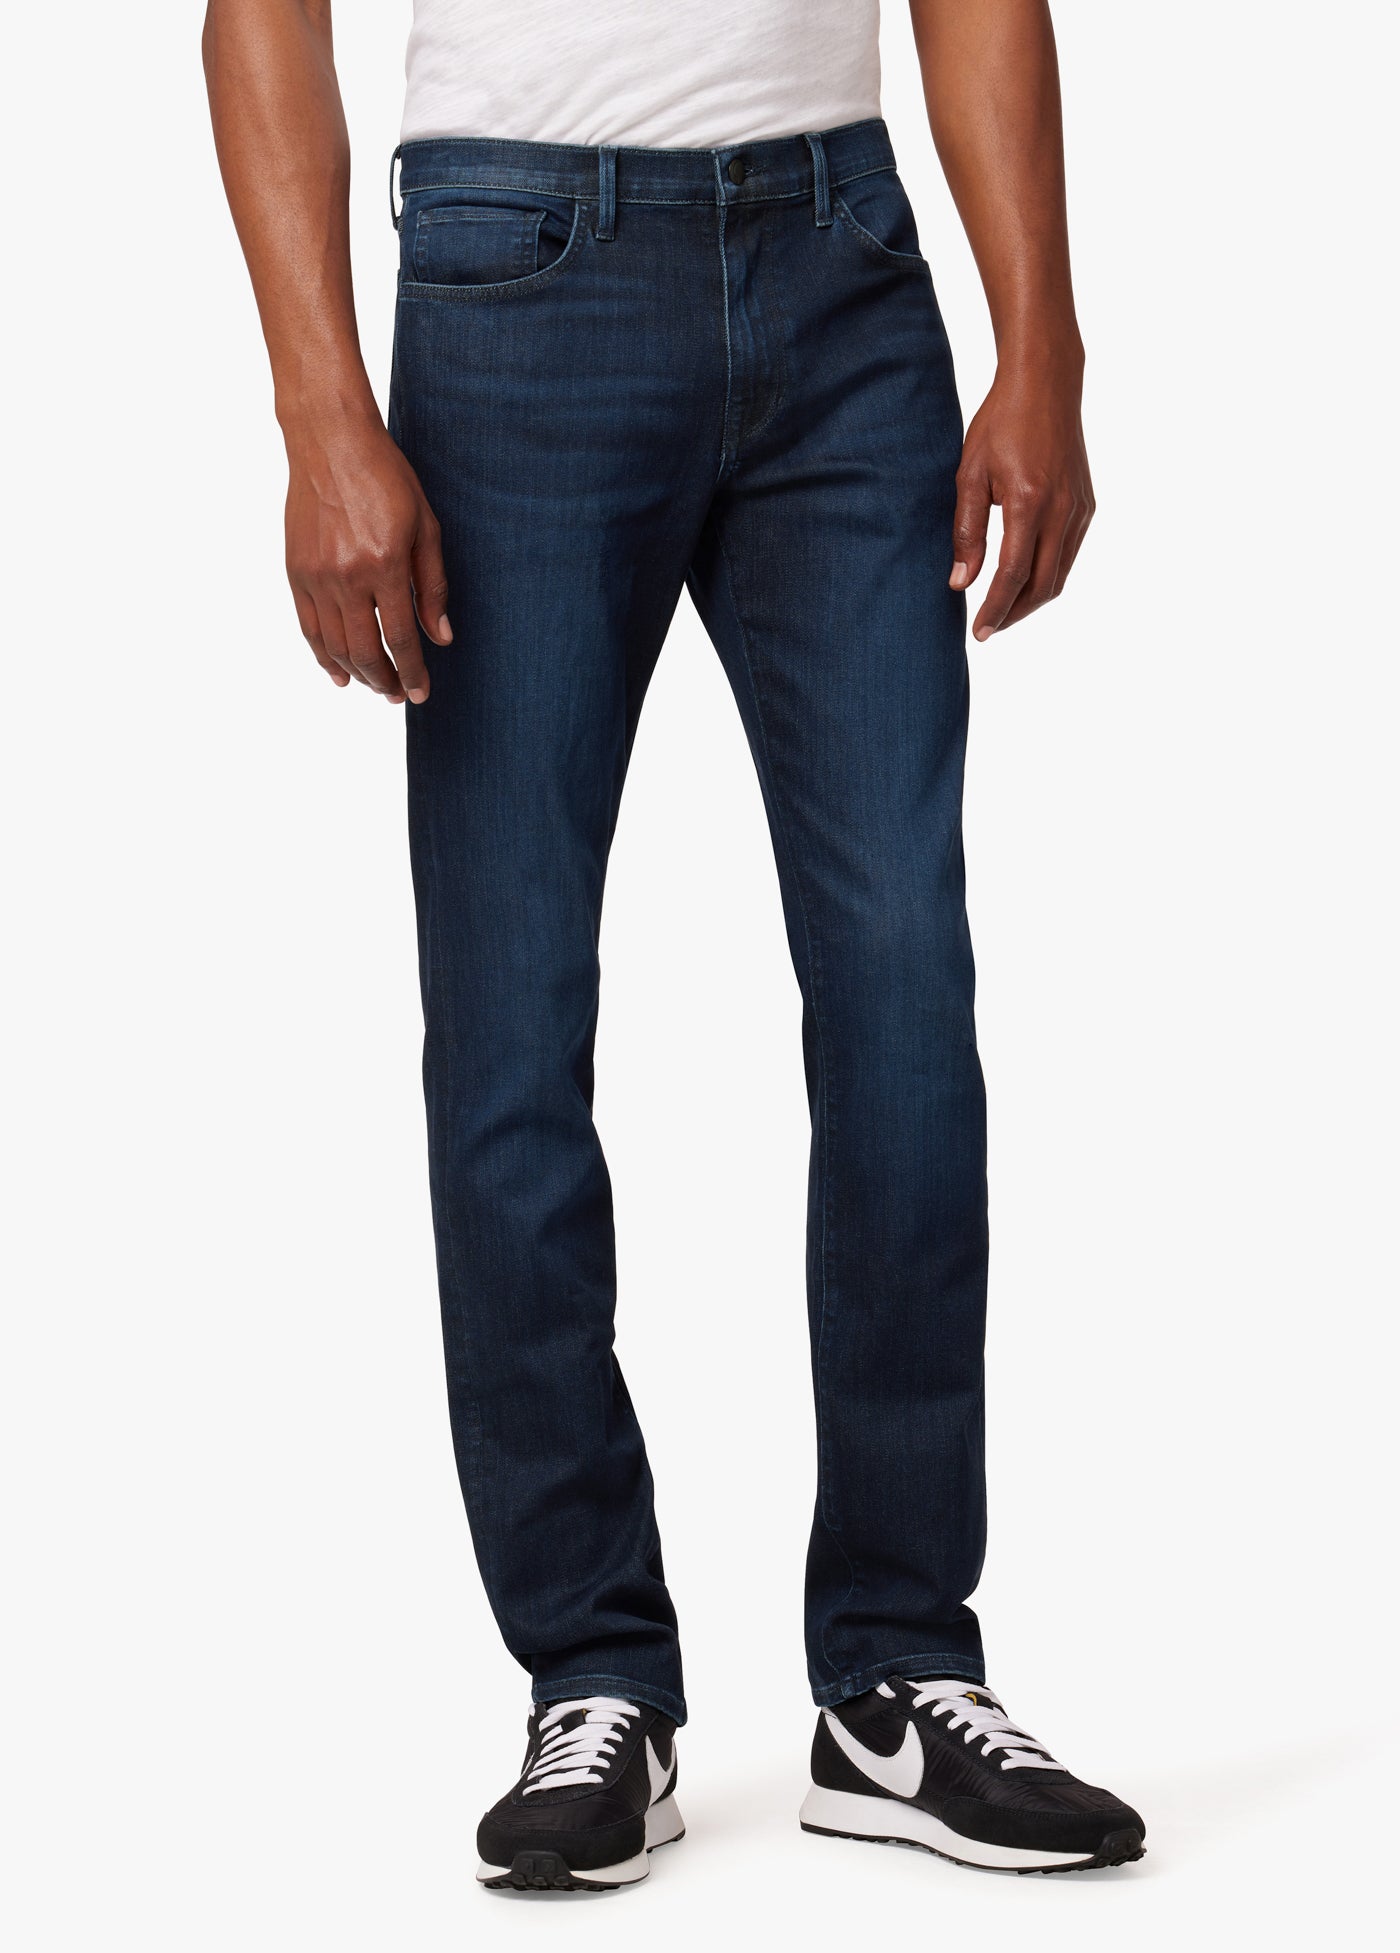 THE ASHER – Joe's® Jeans